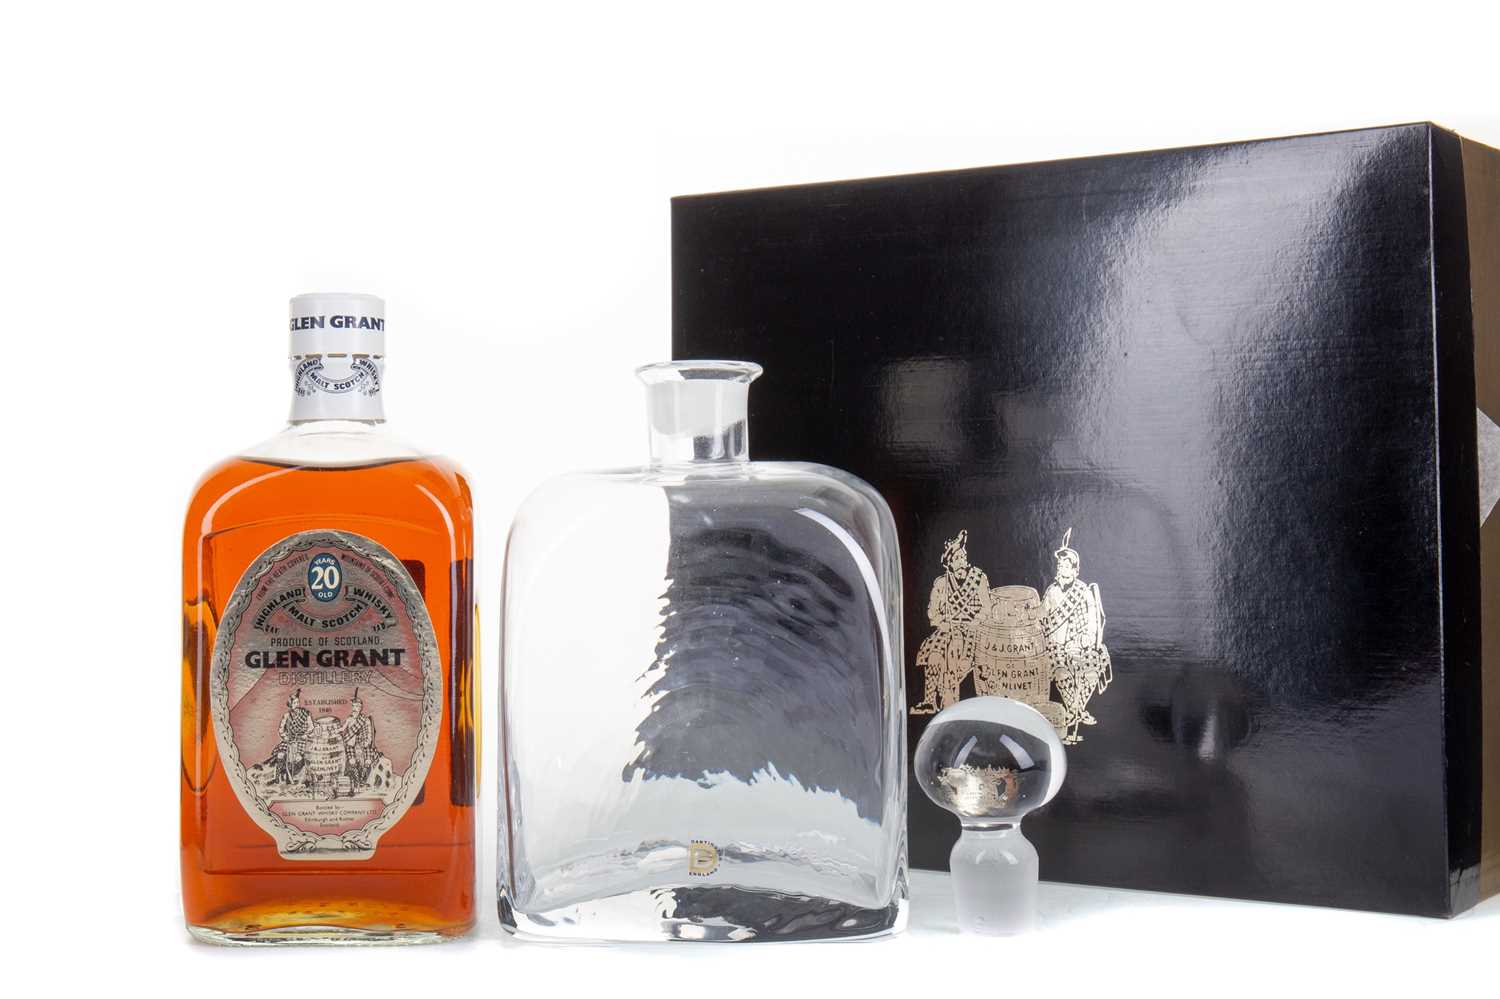 Lot 91 - GLEN GRANT 20 YEAR OLD DIRECTOR'S RESERVE AND DECANTER SET 26 1/3 FL OZ